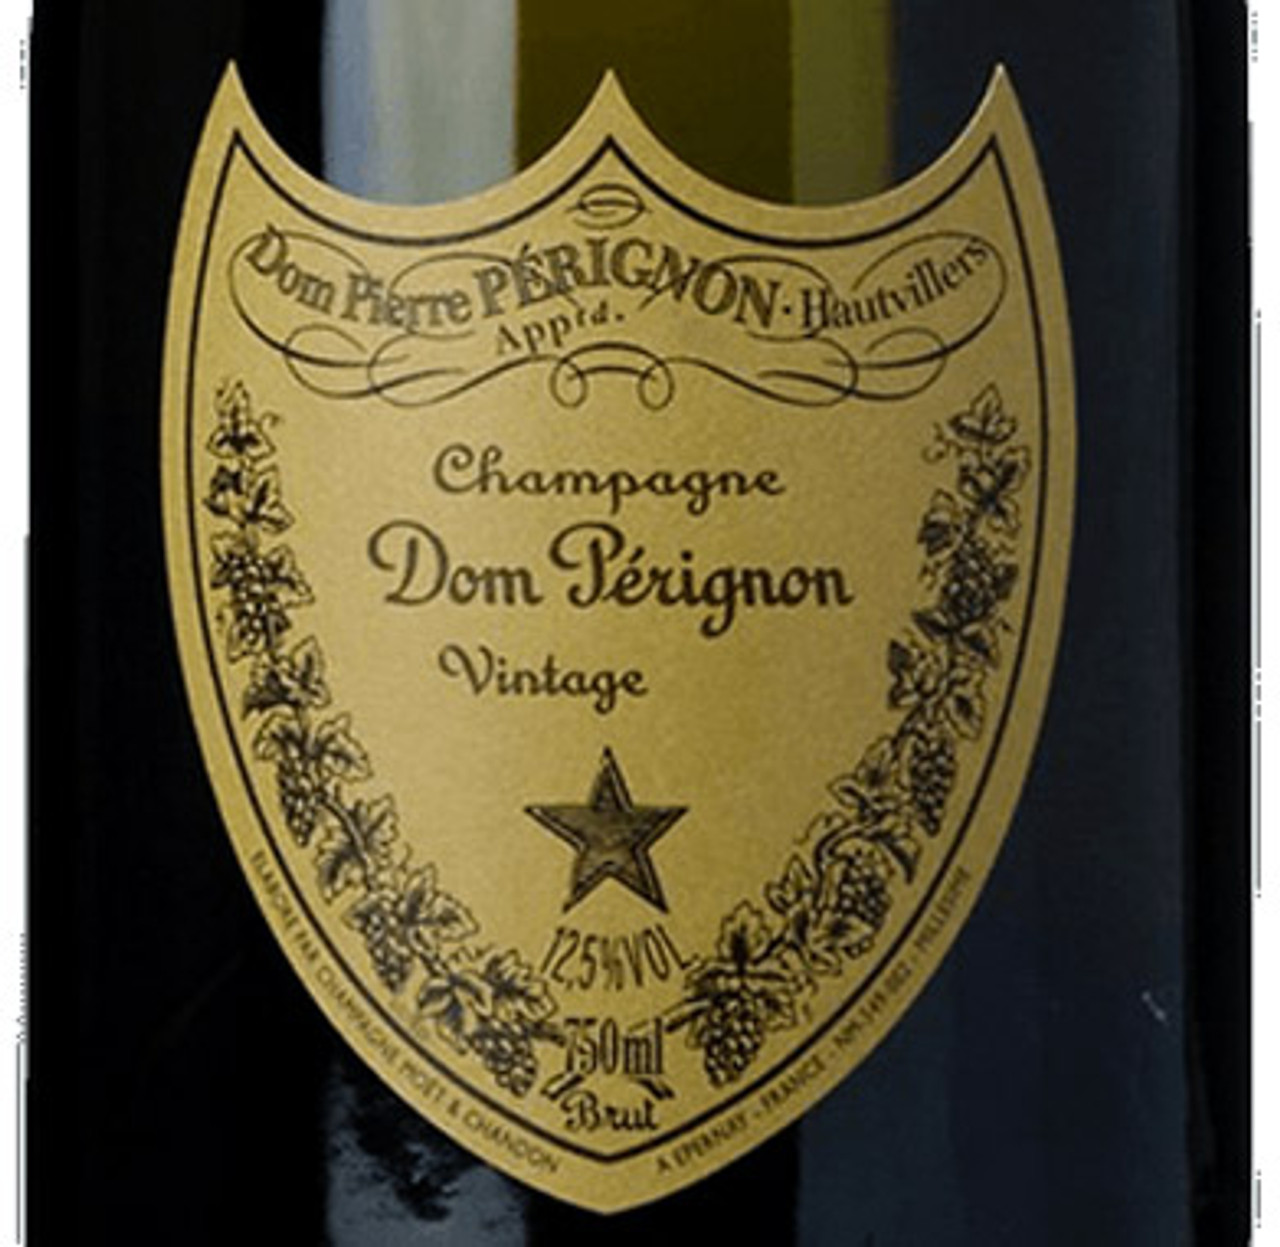 Moët & Chandon, the most famous champagne brand in the world